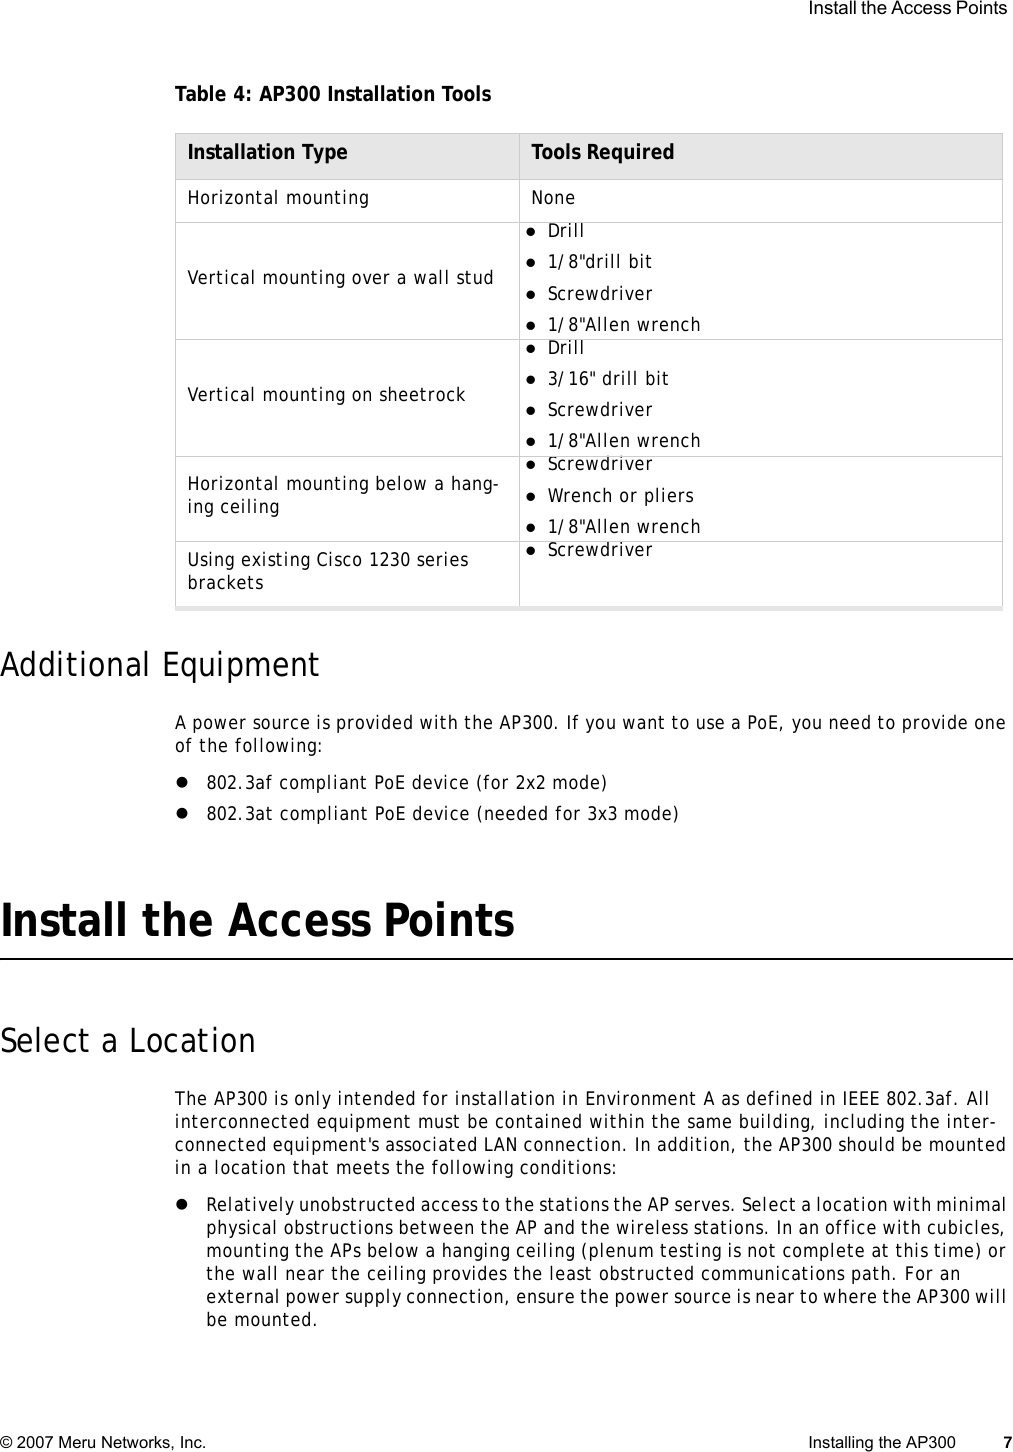  Install the Access Points © 2007 Meru Networks, Inc. Installing the AP300 7 Table 4: AP300 Installation ToolsAdditional EquipmentA power source is provided with the AP300. If you want to use a PoE, you need to provide one of the following:z802.3af compliant PoE device (for 2x2 mode)z802.3at compliant PoE device (needed for 3x3 mode)Install the Access PointsSelect a LocationThe AP300 is only intended for installation in Environment A as defined in IEEE 802.3af. All interconnected equipment must be contained within the same building, including the inter-connected equipment&apos;s associated LAN connection. In addition, the AP300 should be mounted in a location that meets the following conditions:zRelatively unobstructed access to the stations the AP serves. Select a location with minimal physical obstructions between the AP and the wireless stations. In an office with cubicles, mounting the APs below a hanging ceiling (plenum testing is not complete at this time) or the wall near the ceiling provides the least obstructed communications path. For an external power supply connection, ensure the power source is near to where the AP300 will be mounted.Installation Type Tools RequiredHorizontal mounting NoneVertical mounting over a wall studzDrill z1/8&quot;drill bitzScrewdriverz1/8&quot;Allen wrenchVertical mounting on sheetrockzDrillz3/16&quot; drill bitzScrewdriverz1/8&quot;Allen wrenchHorizontal mounting below a hang-ing ceilingzScrewdriverzWrench or pliersz1/8&quot;Allen wrenchUsing existing Cisco 1230 series bracketszScrewdriver